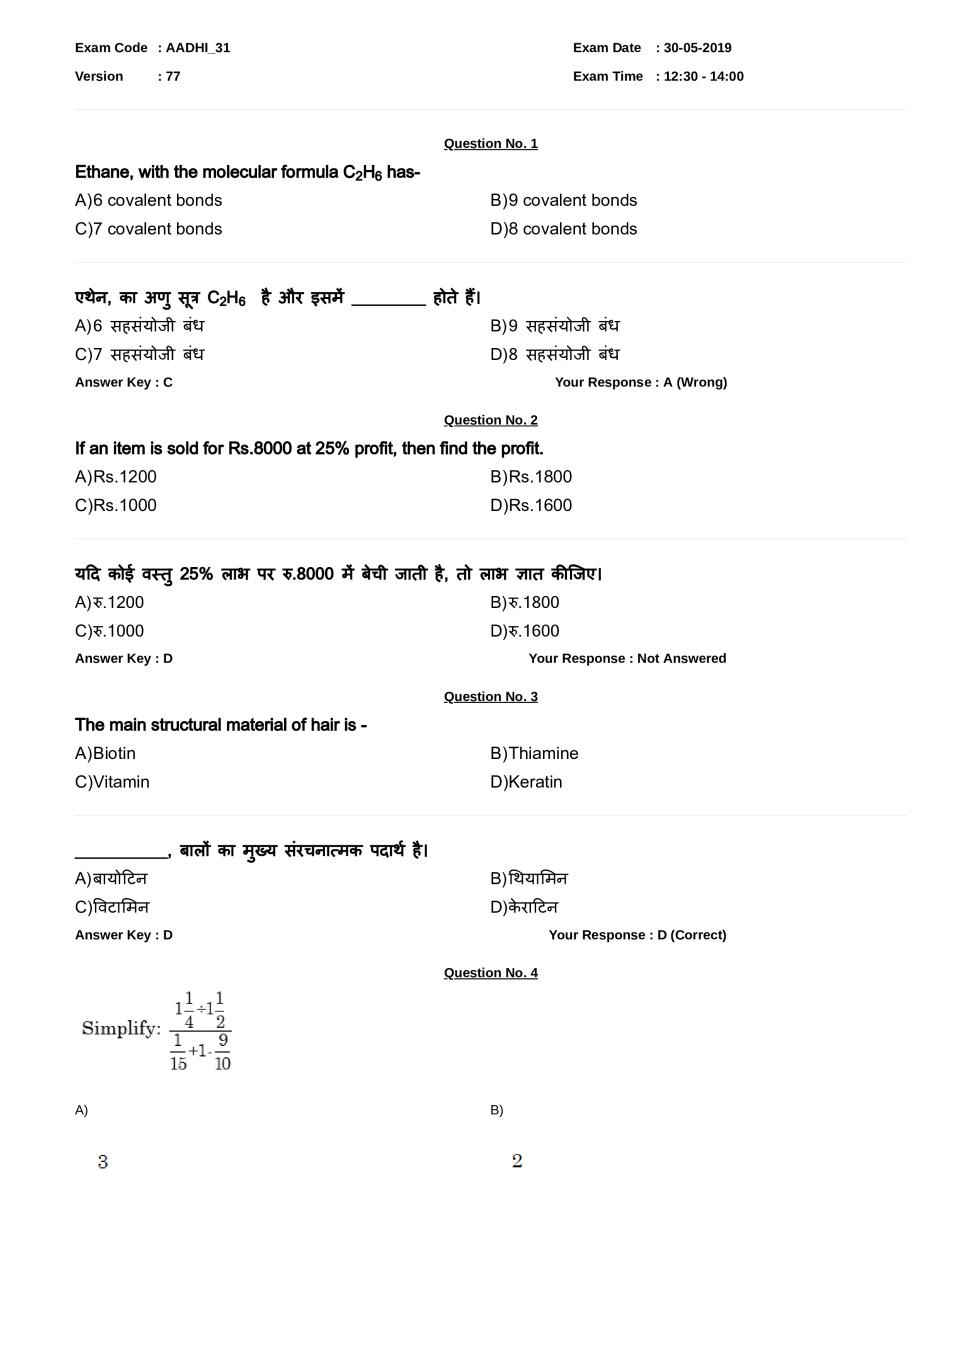 RRB JE Question Paper with Answers for 30 May 2019 Exam Shift 2 - Page 1